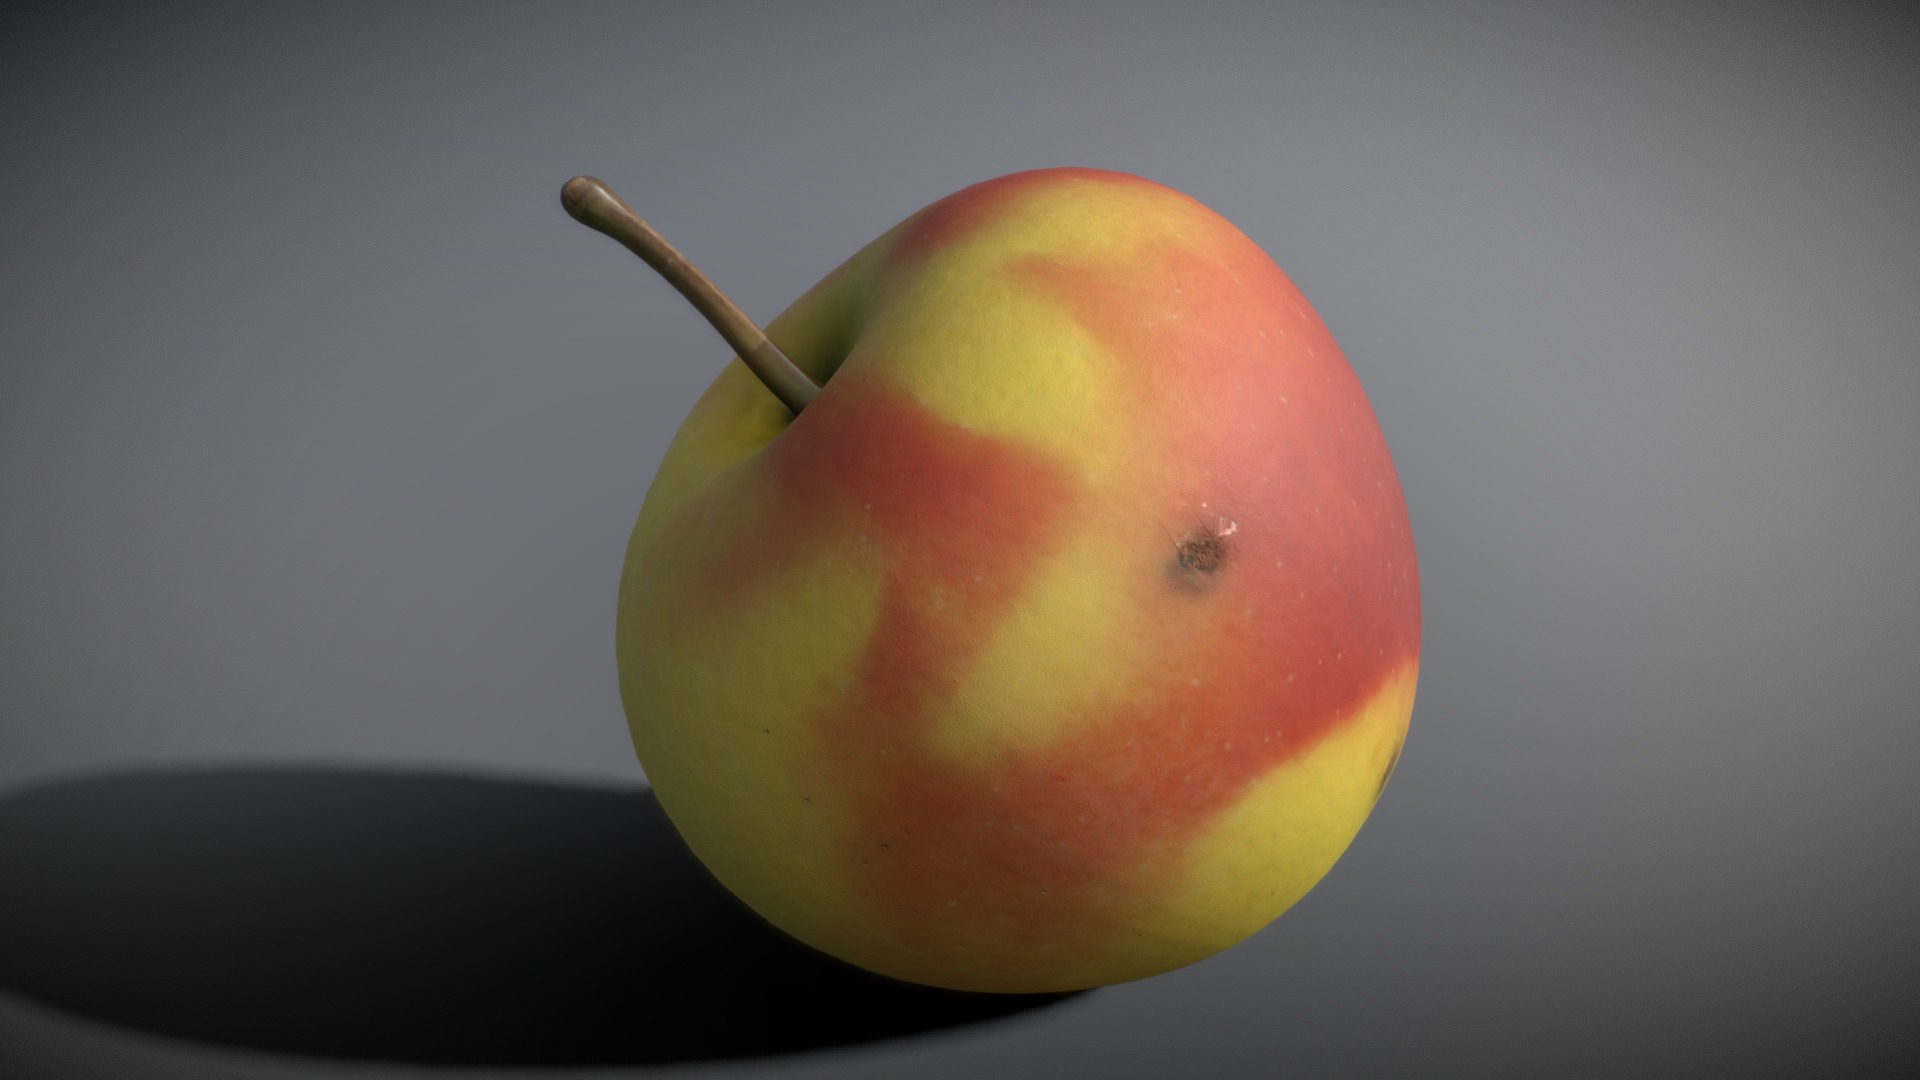 3D model Apple - This is a 3D model of the Apple. The 3D model is about a green apple with a stem.